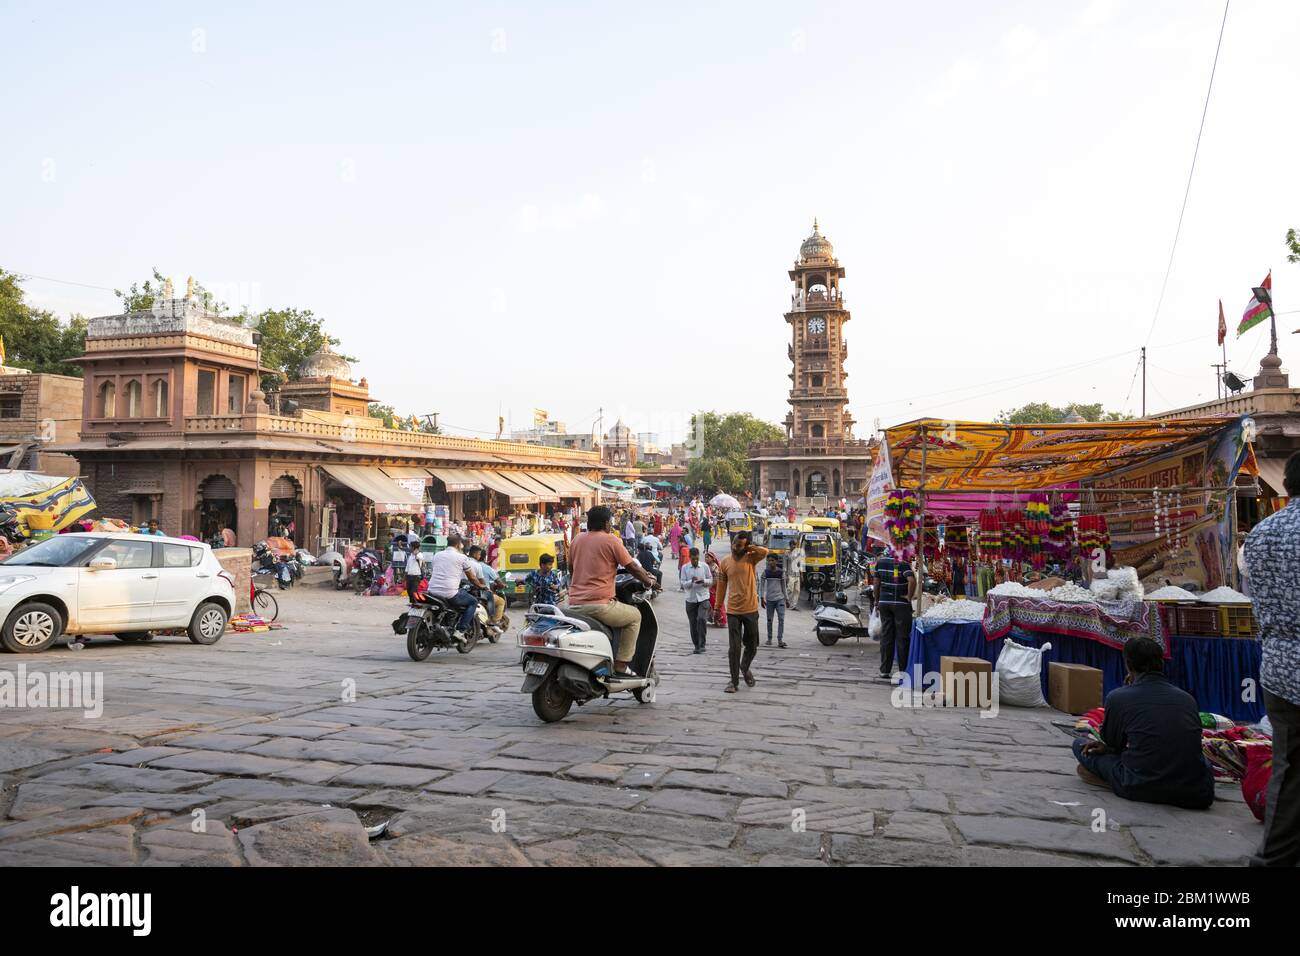 Daily life in the Sadar Market with the Ghanta Ghar Clock Tower in the distance. Stock Photo